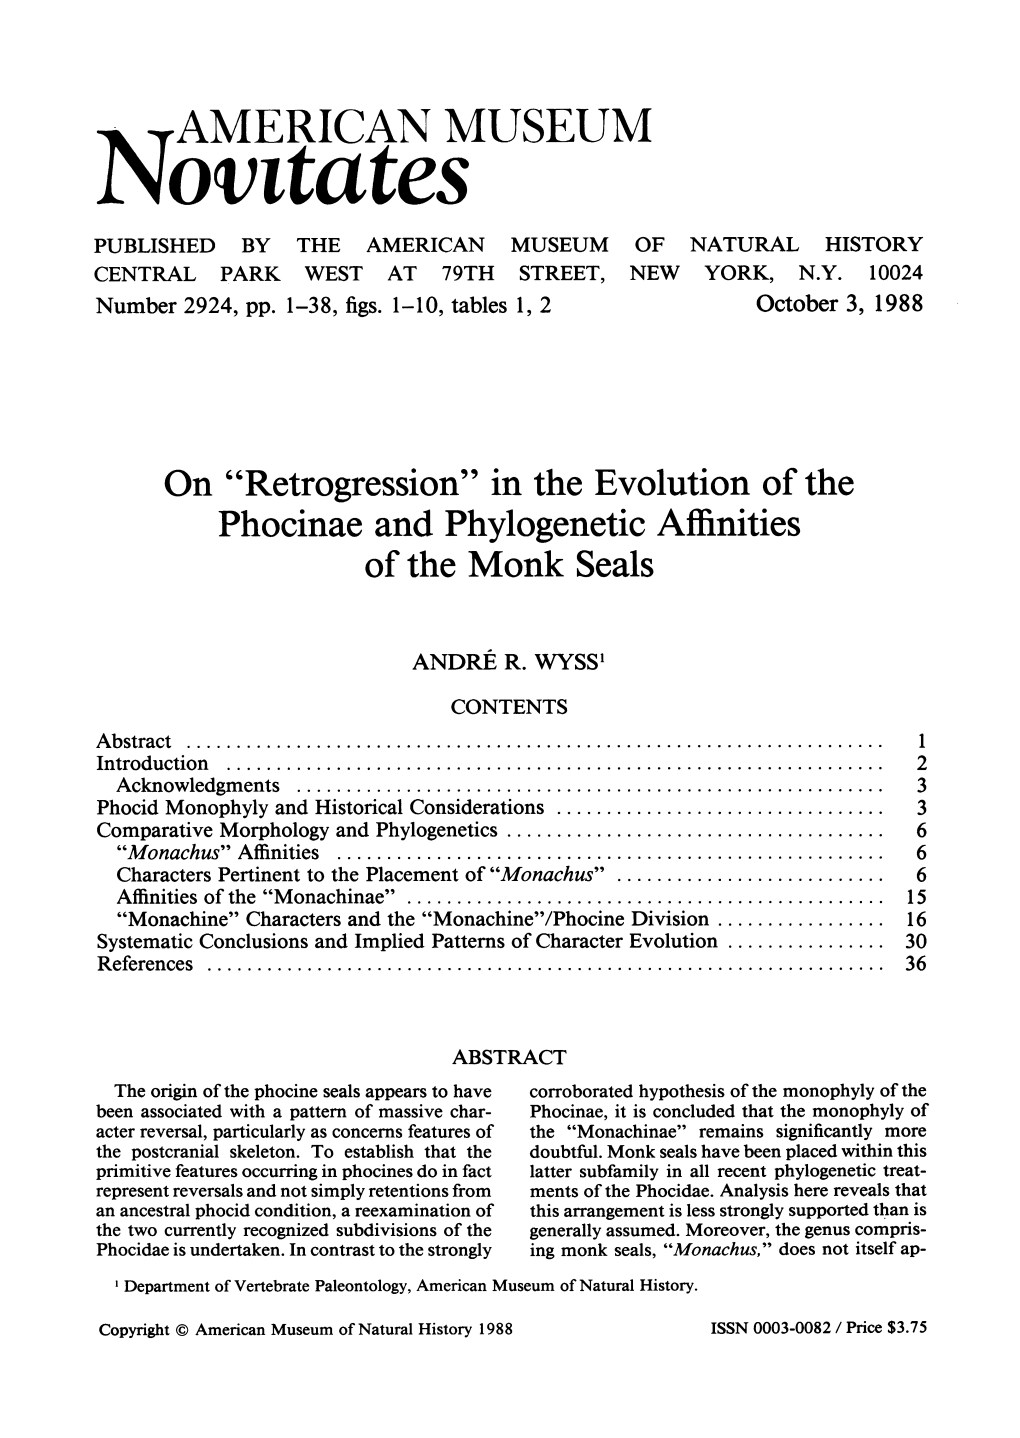 Phocinae and Phylogenetic Affinities of the Monk Seals